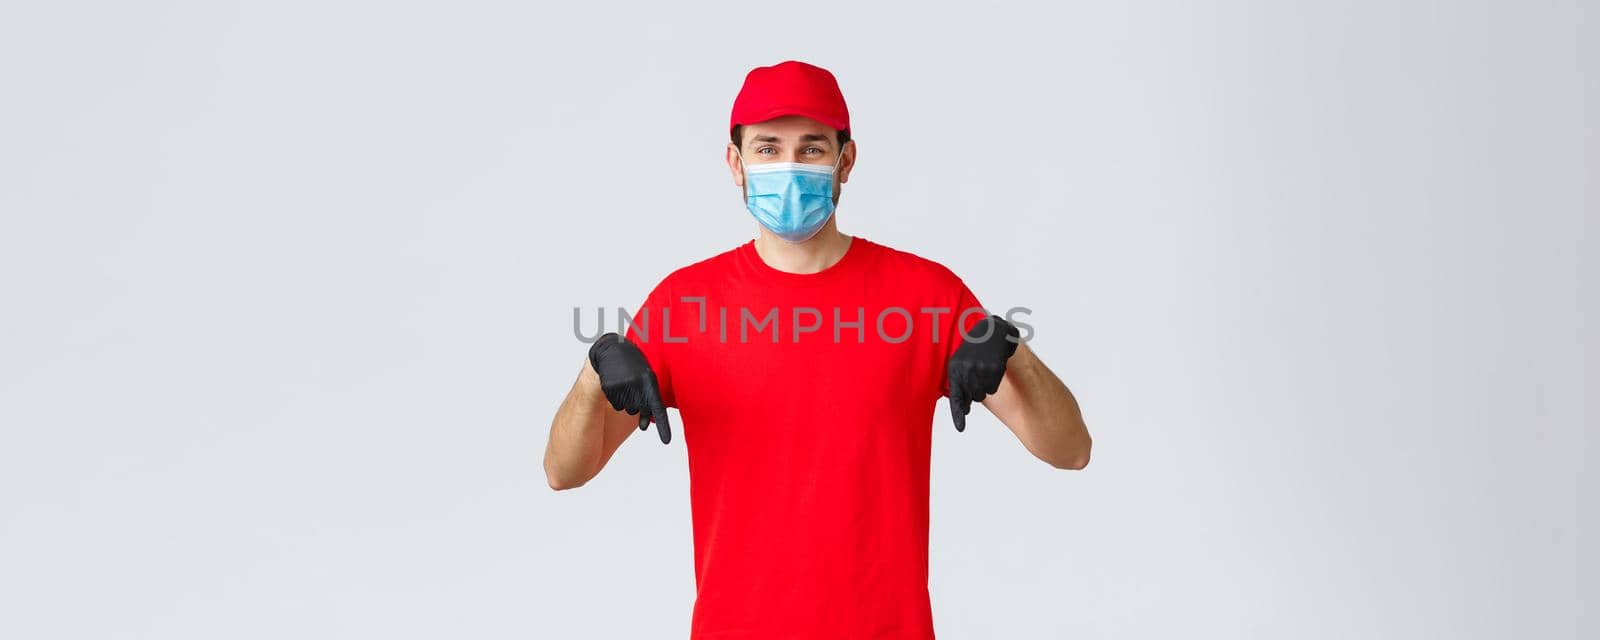 Covid-19, self-quarantine, online shopping and shipping concept. Smiling friendly delivery guy red uniform, cap and t-shirt, wear medical mask with gloves, pointing down, showing promo or client info.